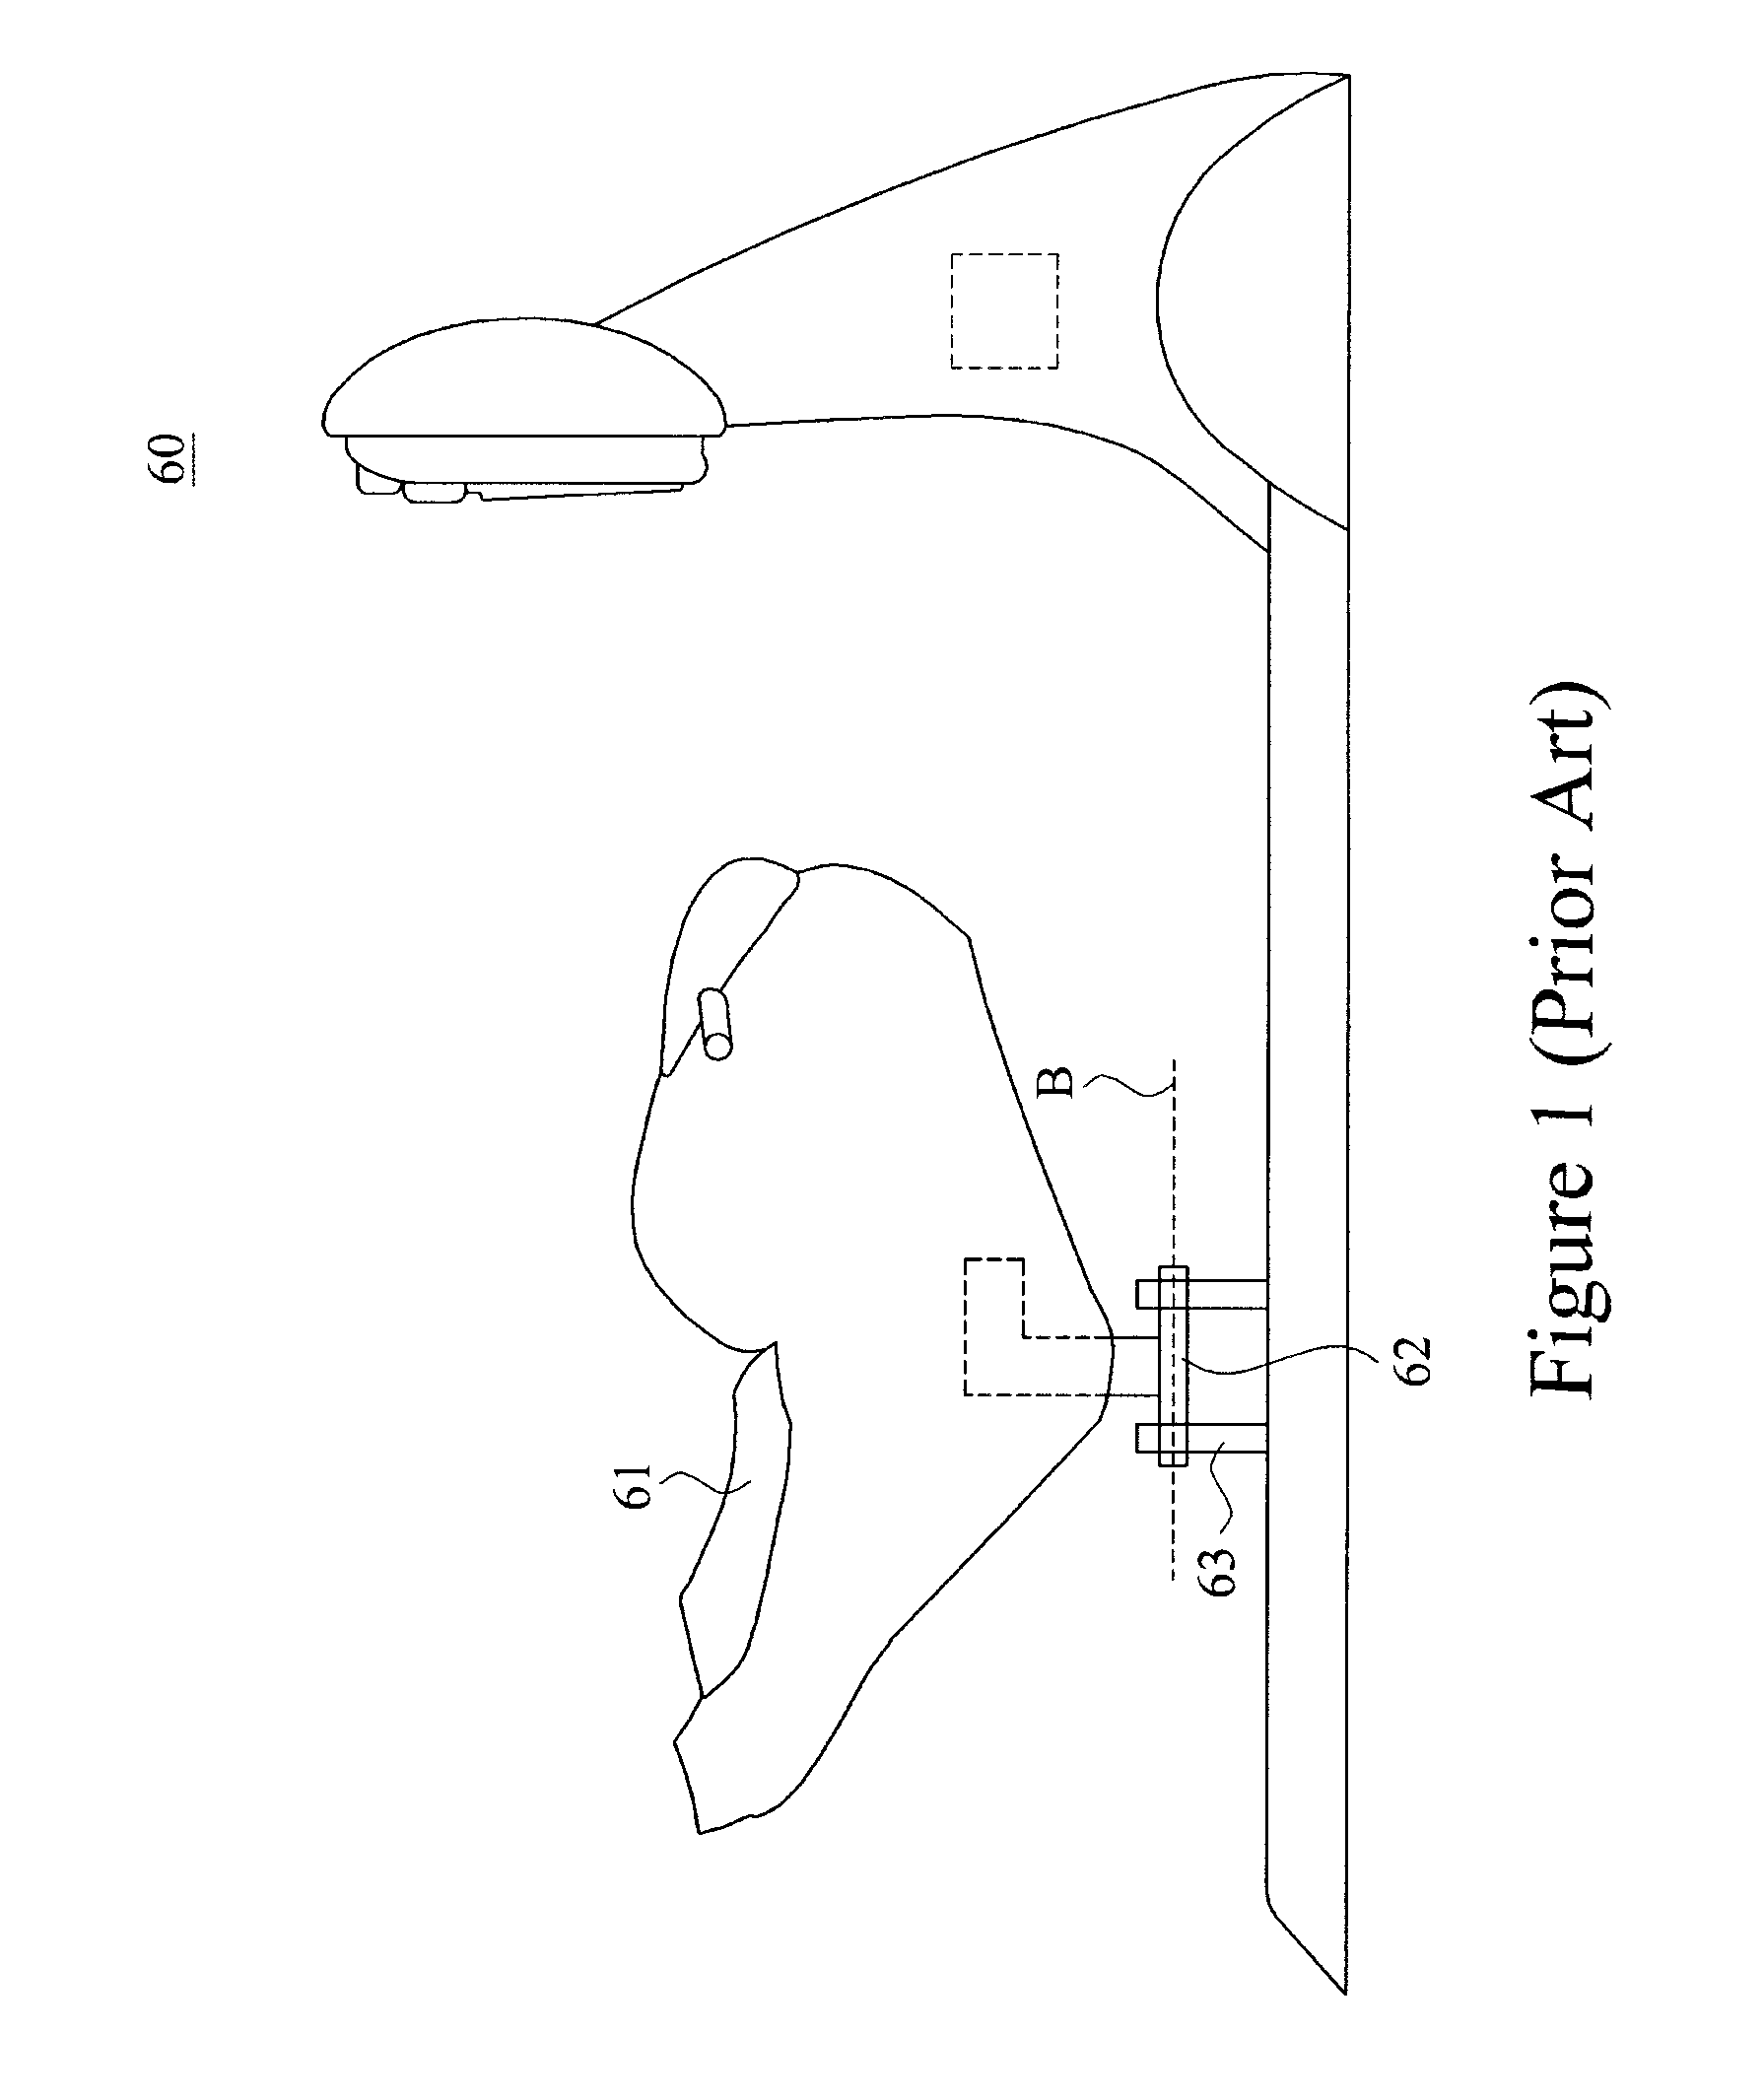 Driving simulation device for executing a simulating game